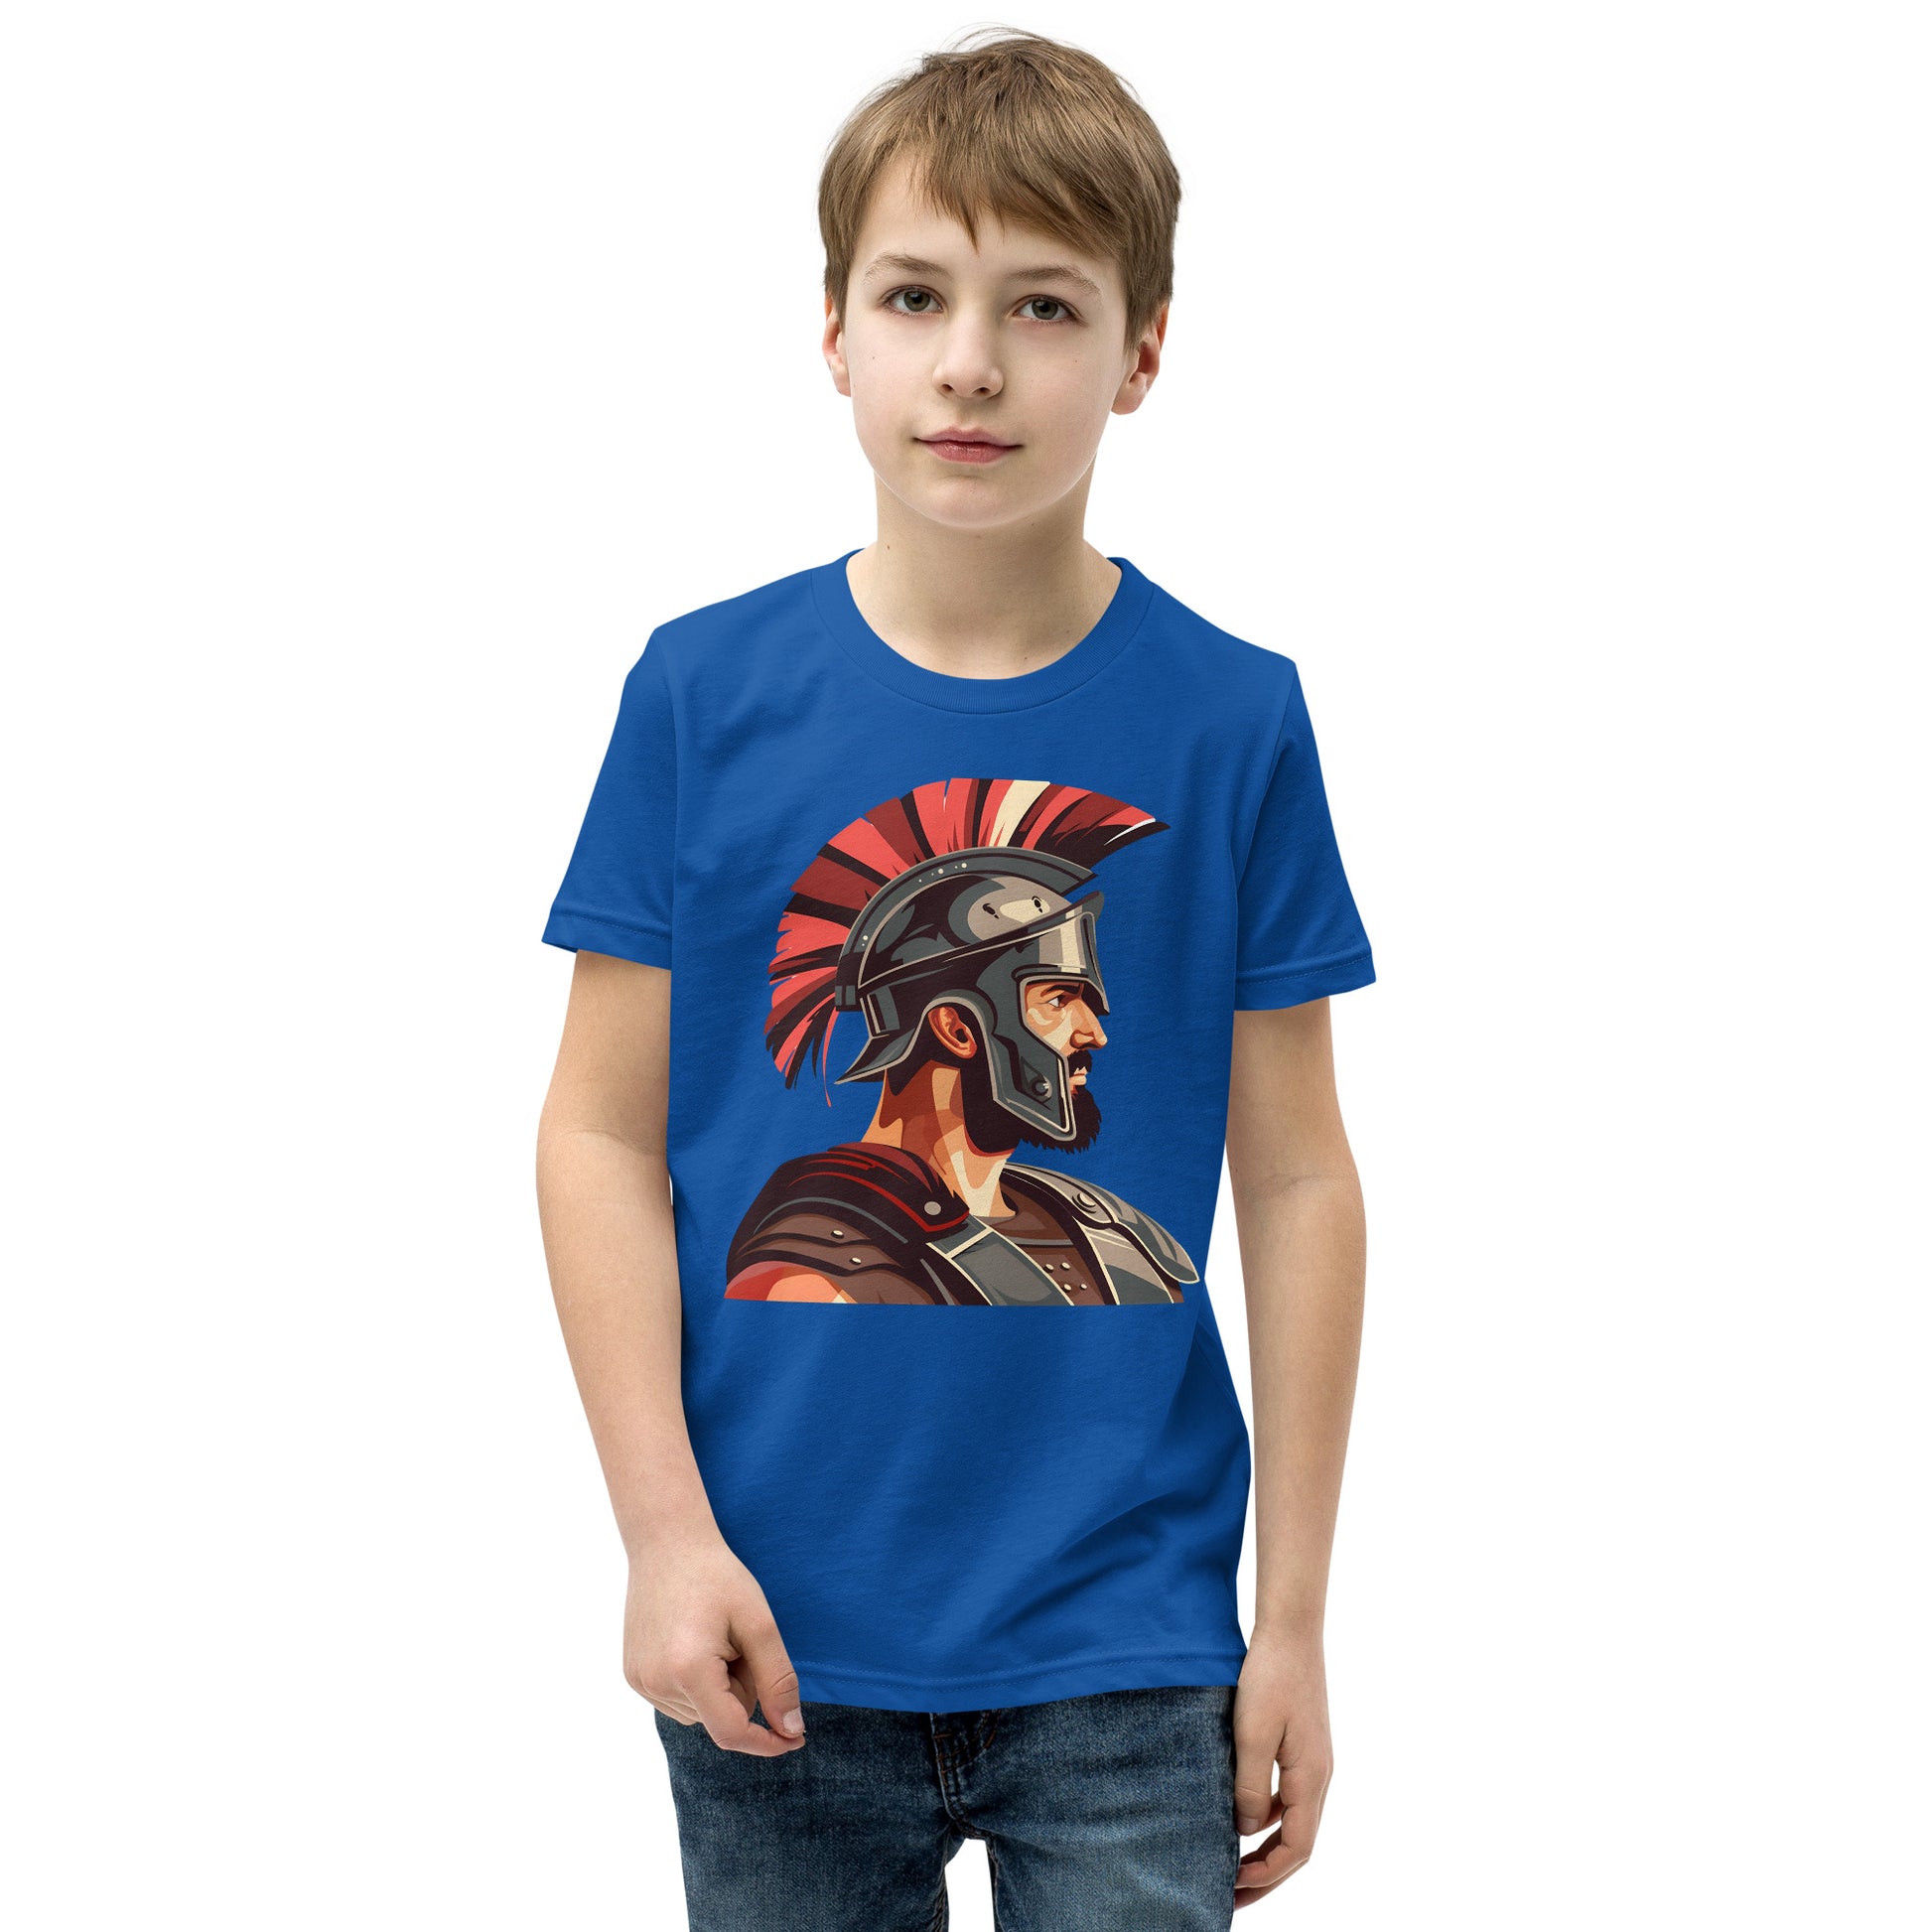 Teenager with a royal blue T-shirt with a print of a warrior